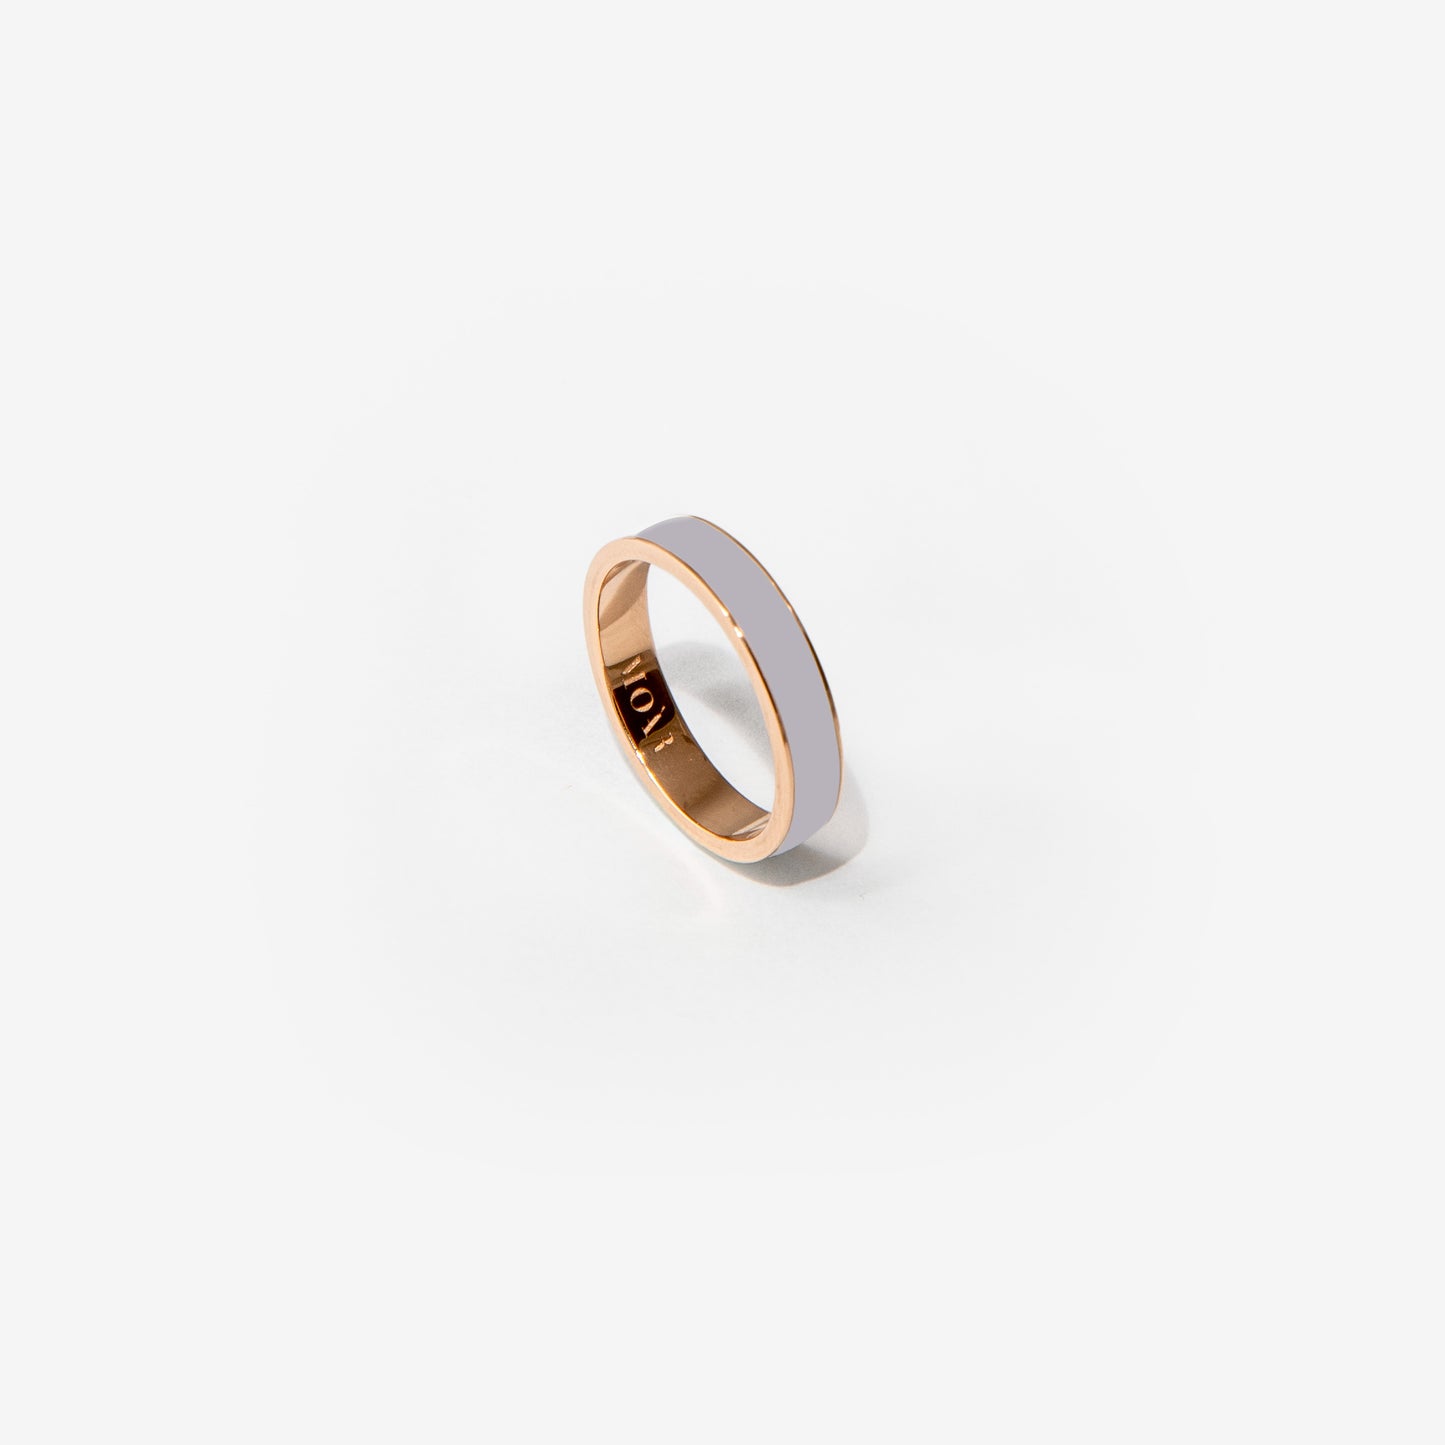 Band ring in gold and cool gray enamel